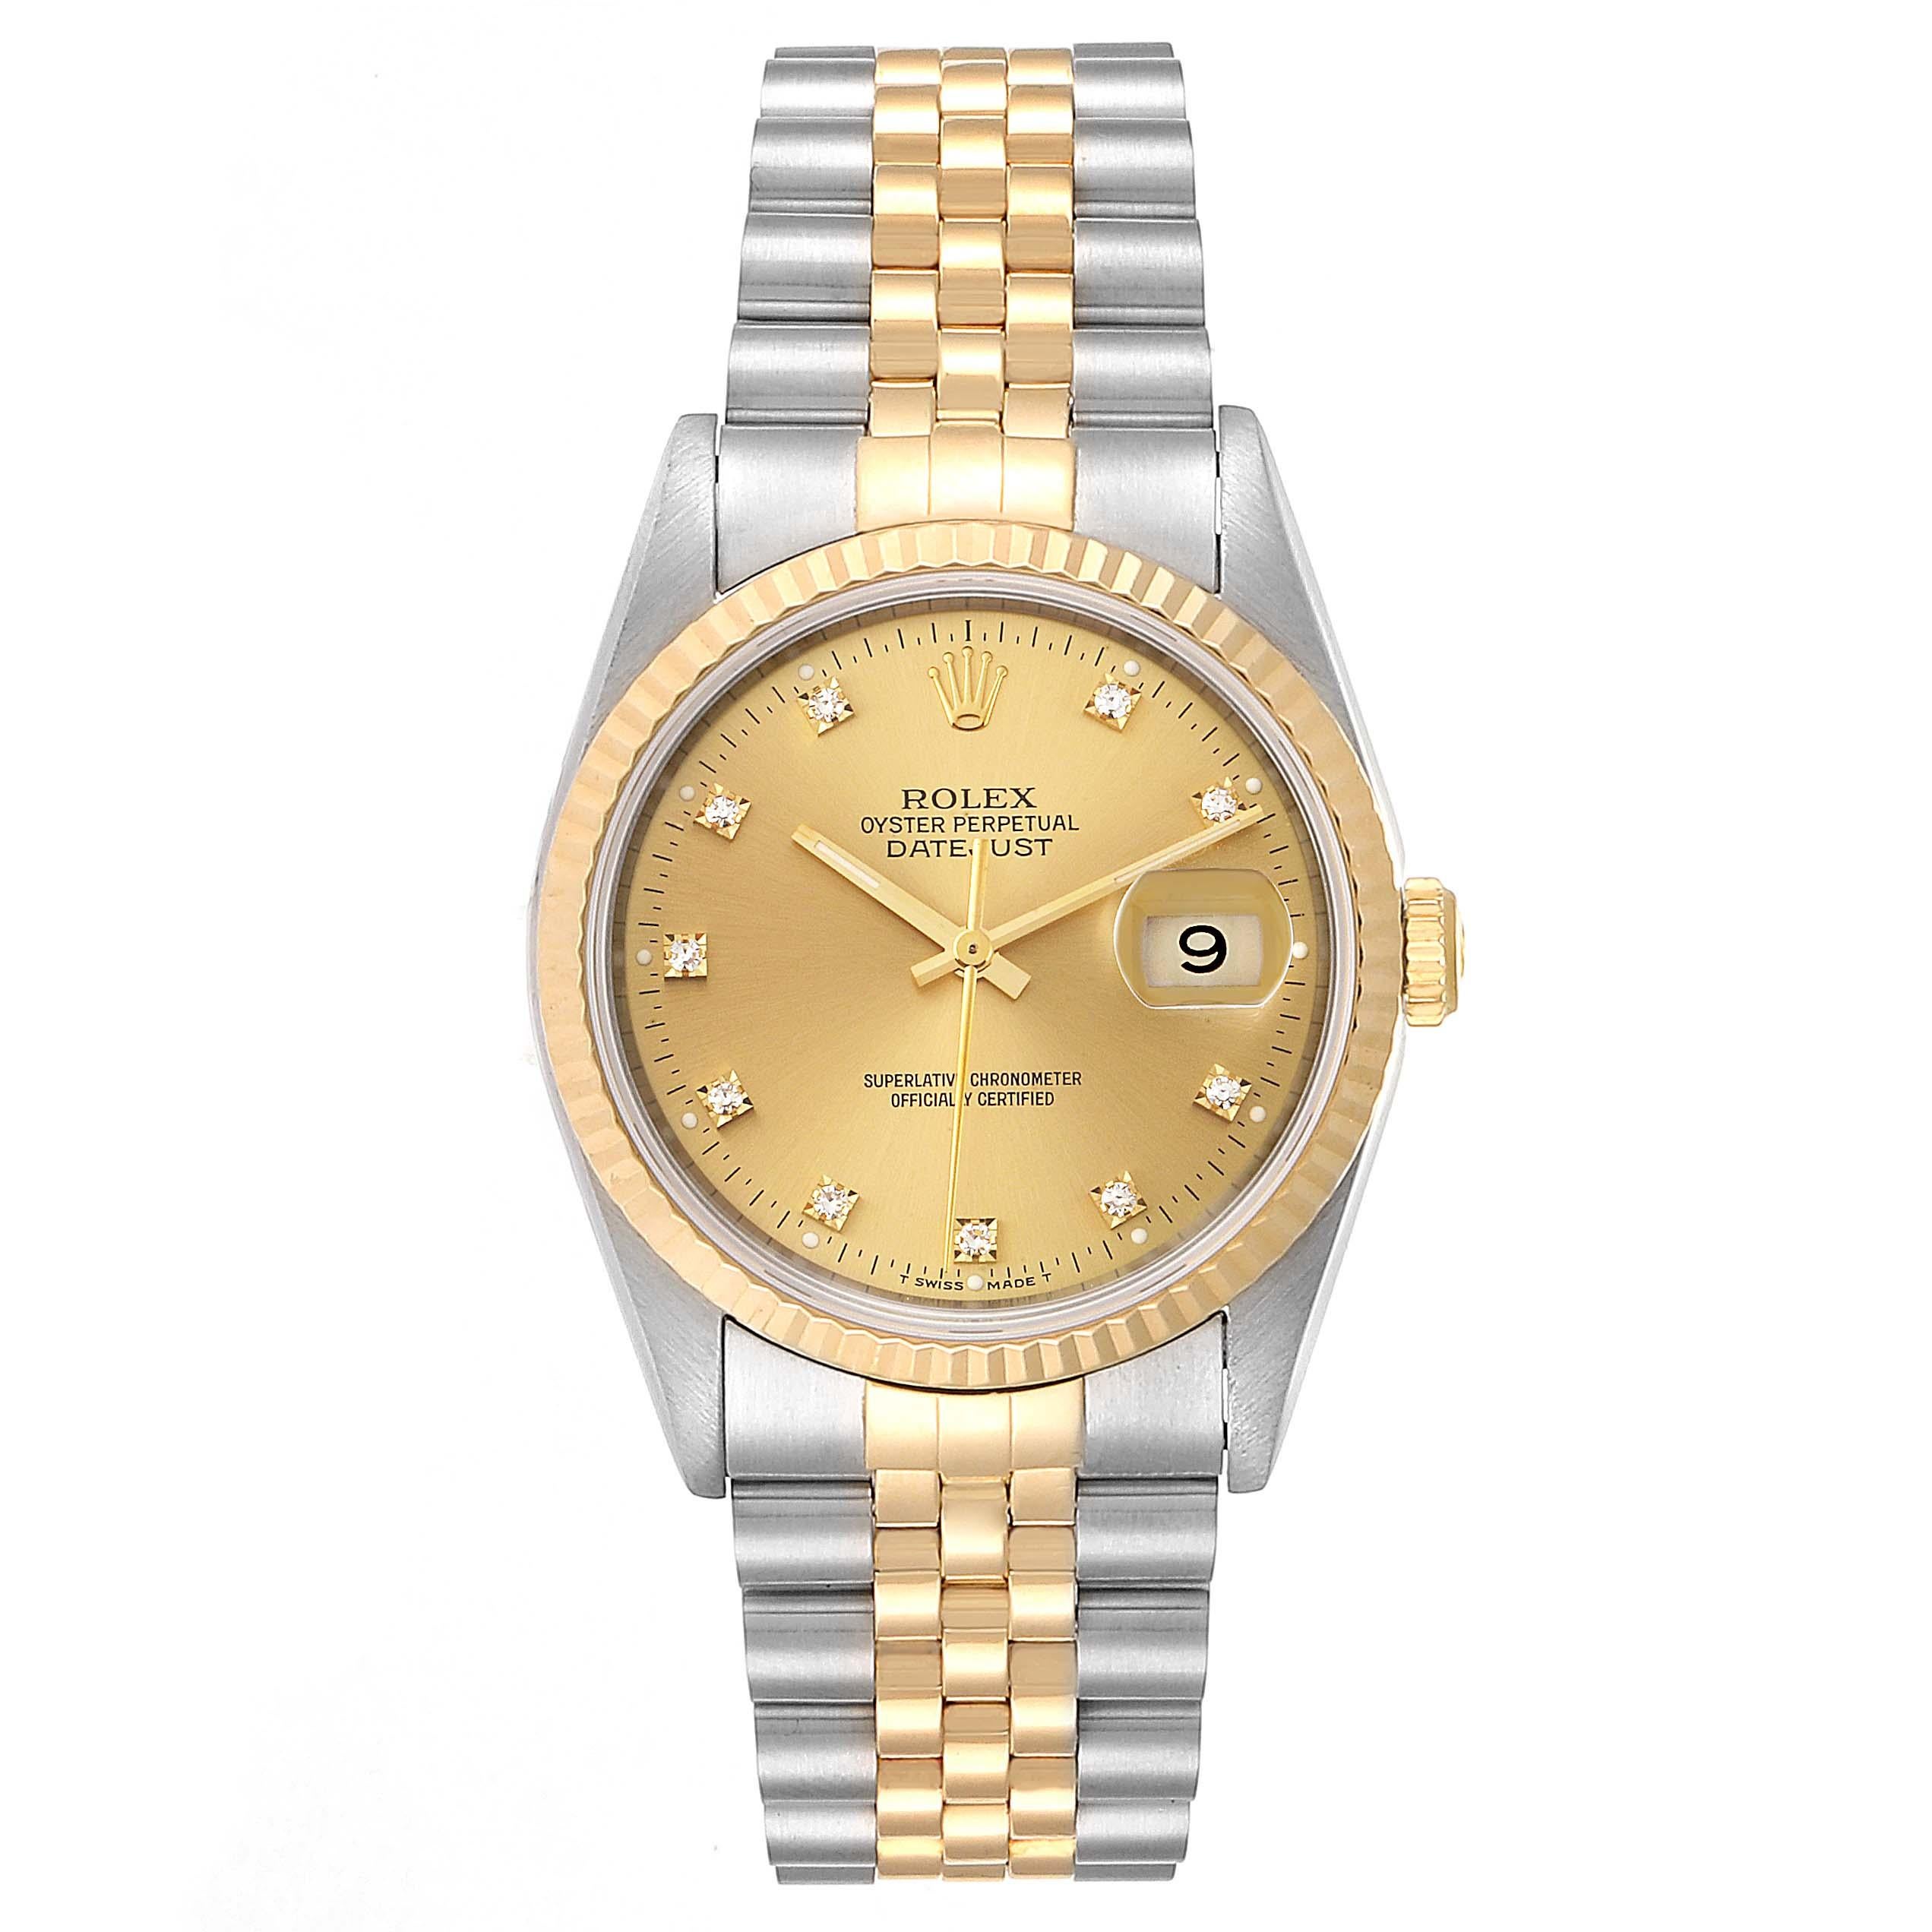 Rolex Datejust Steel Yellow Gold Diamond Mens Watch 16233 Box Papers. Officially certified chronometer self-winding movement. Stainless steel case 36 mm in diameter. Rolex logo on a 18K yellow gold crown. 18k yellow gold fluted bezel. Scratch